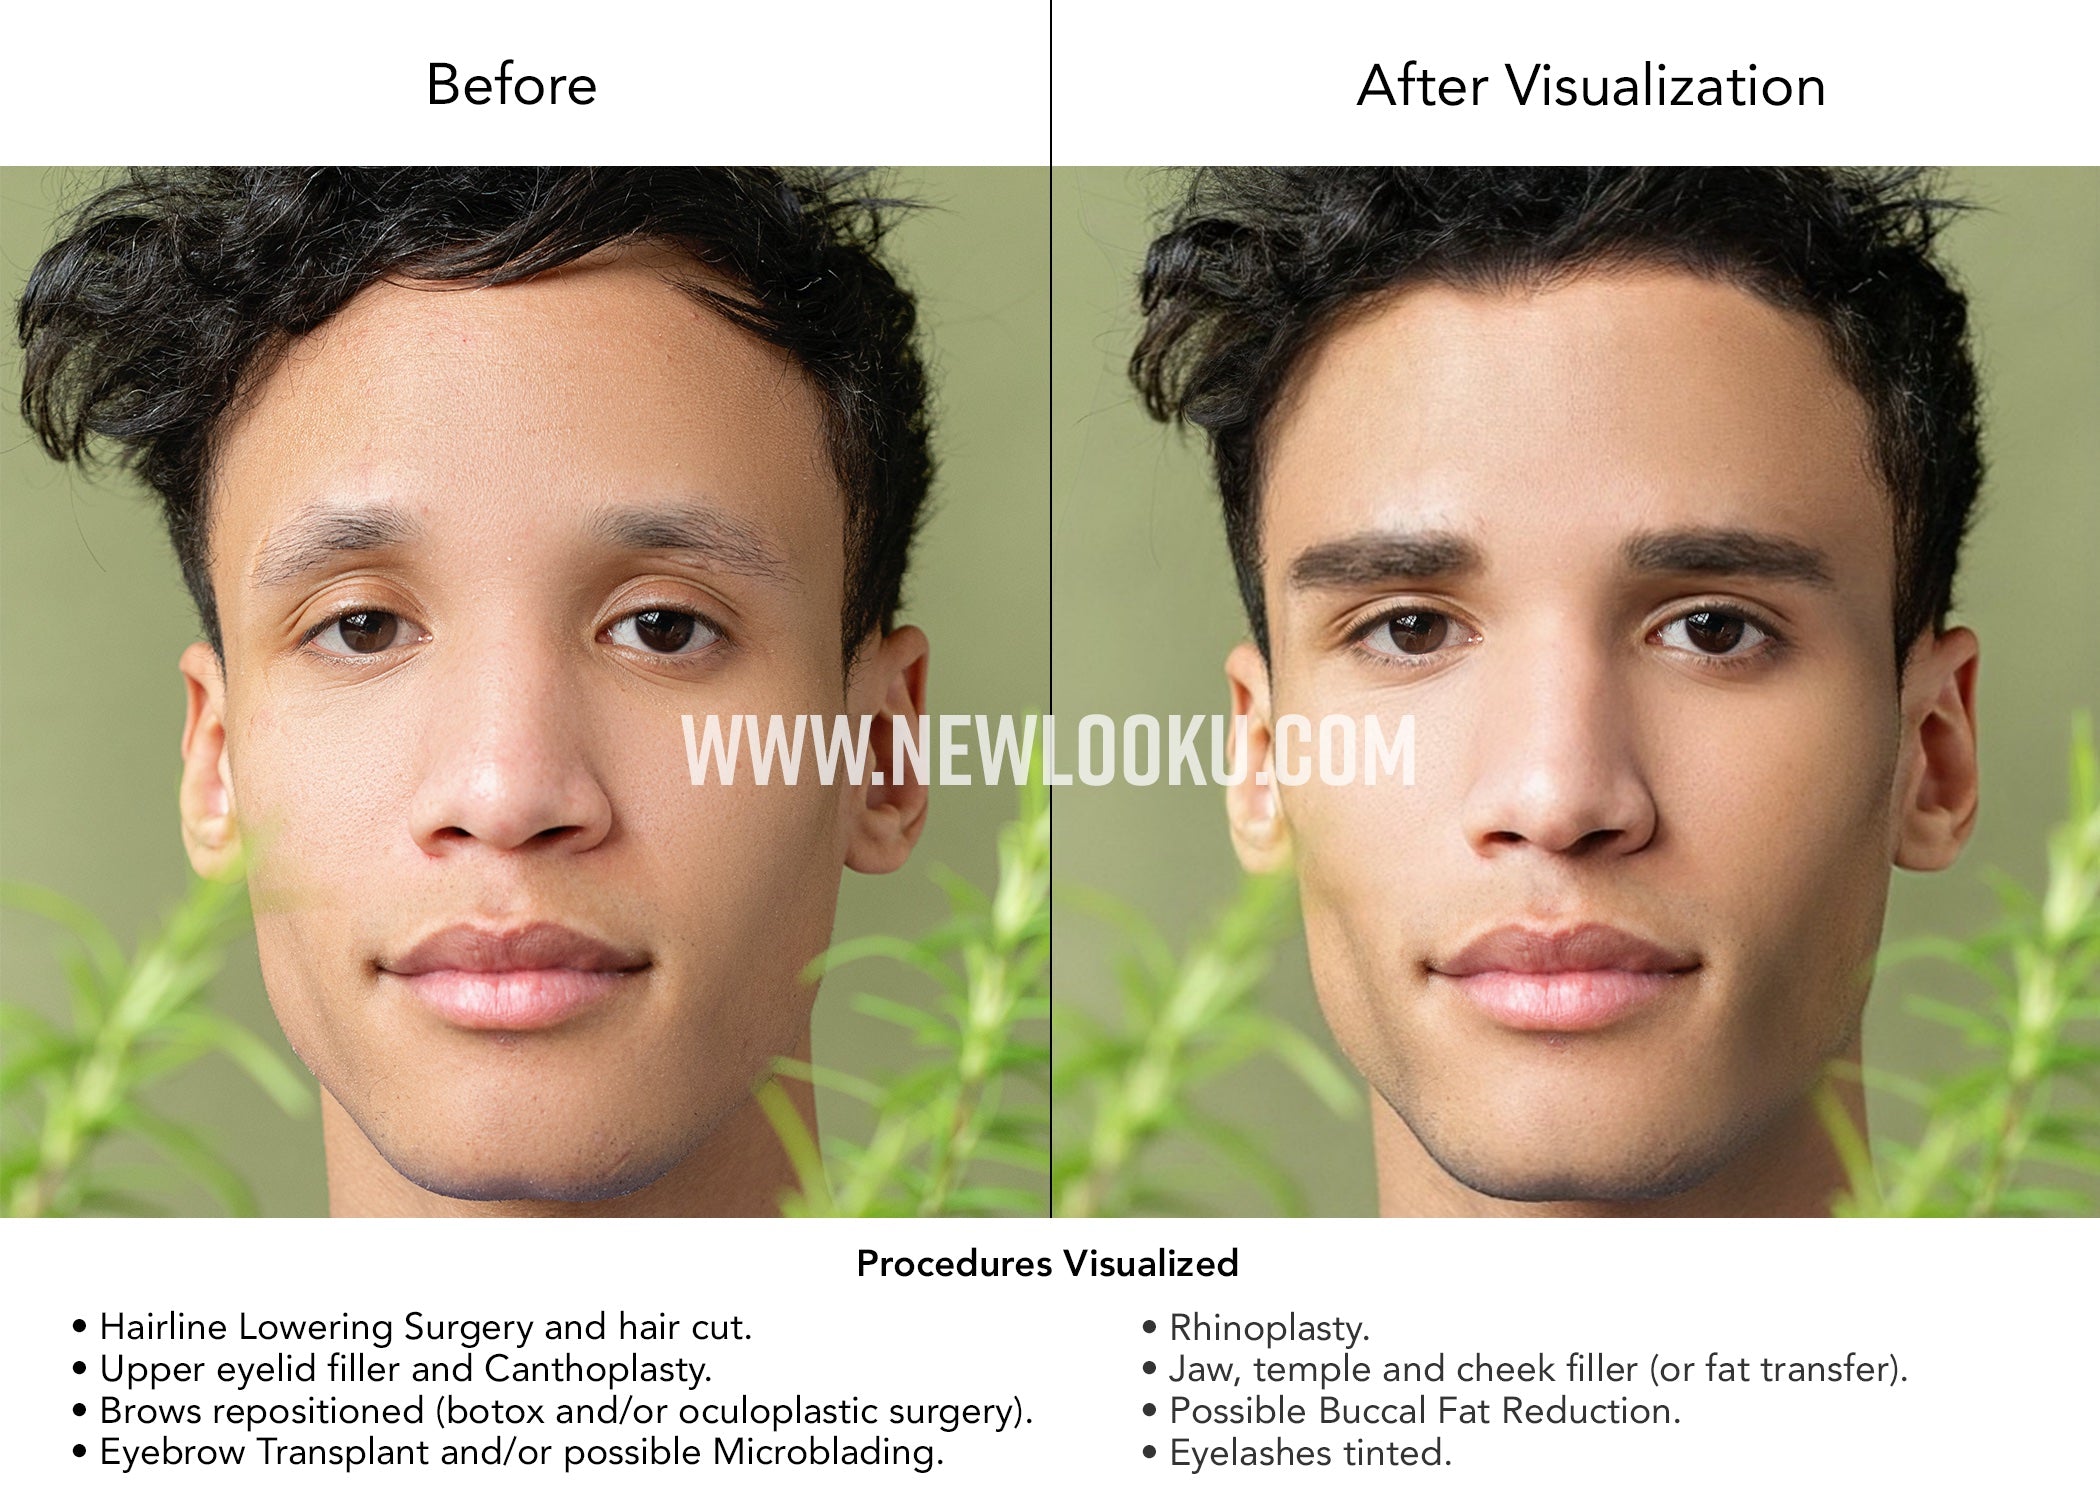 Male Plastic Surgery Visualization Before and After: Hairline Lowering Surgery and hair cut. Upper eyelid filler and Canthoplasty. Brows repositioned (using botox and/or surgical techniques). Eyebrow Transplant with possible Microblading. Rhinoplasty. Jaw, temple and cheek filler (or fat transfer). Possible Buccal Fat Reduction.